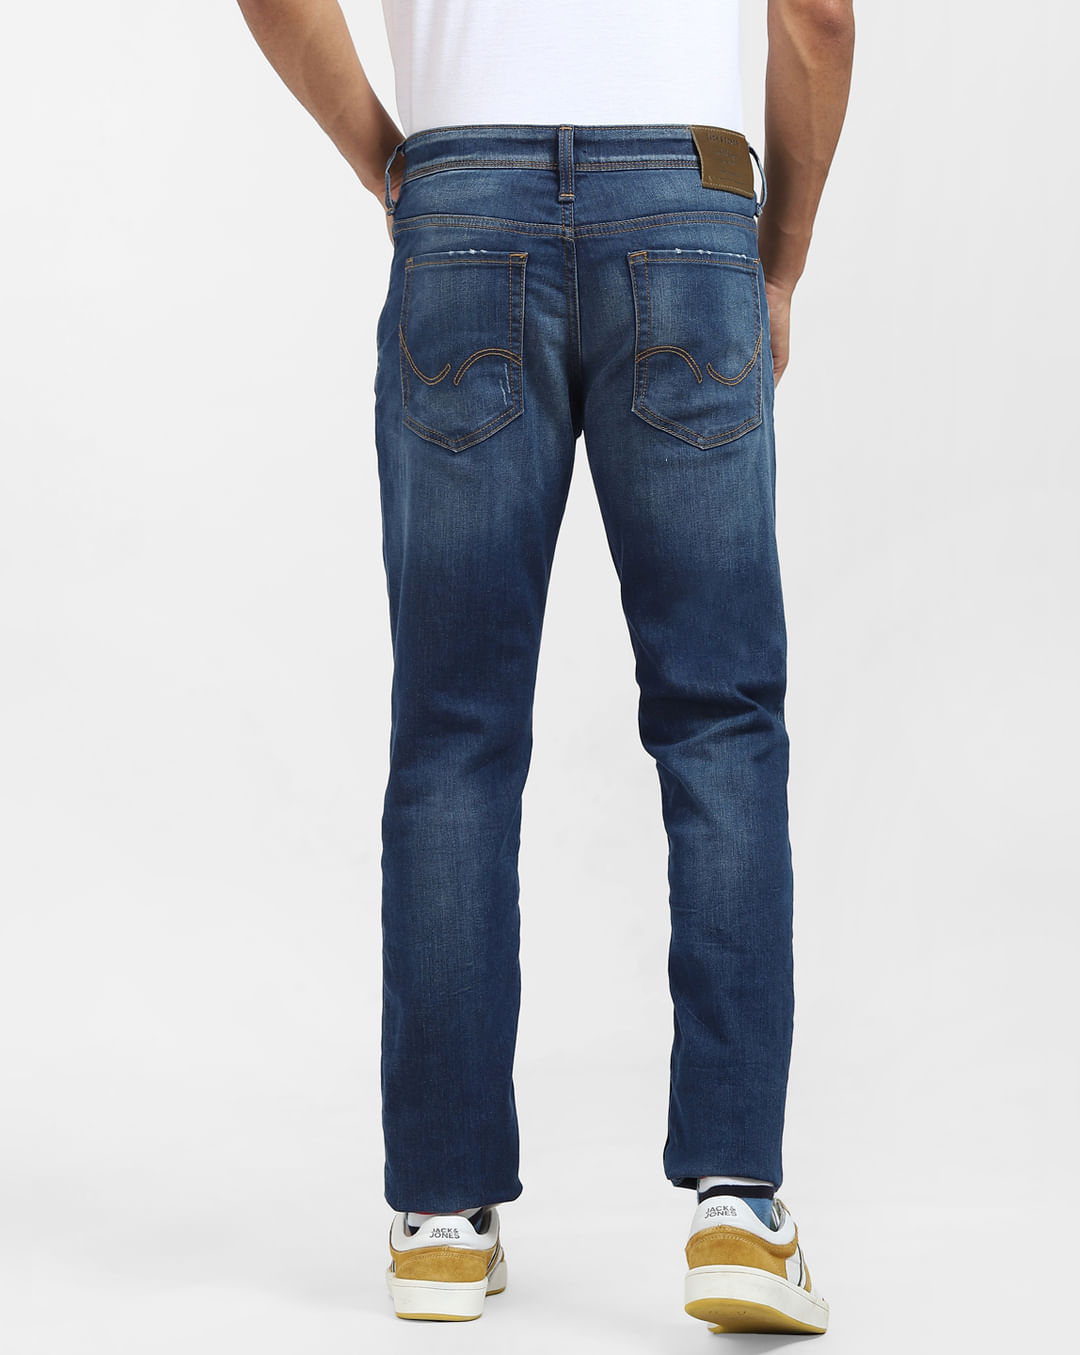 Buy Blue Low Rise Faded Slim Fit Jeans for Men